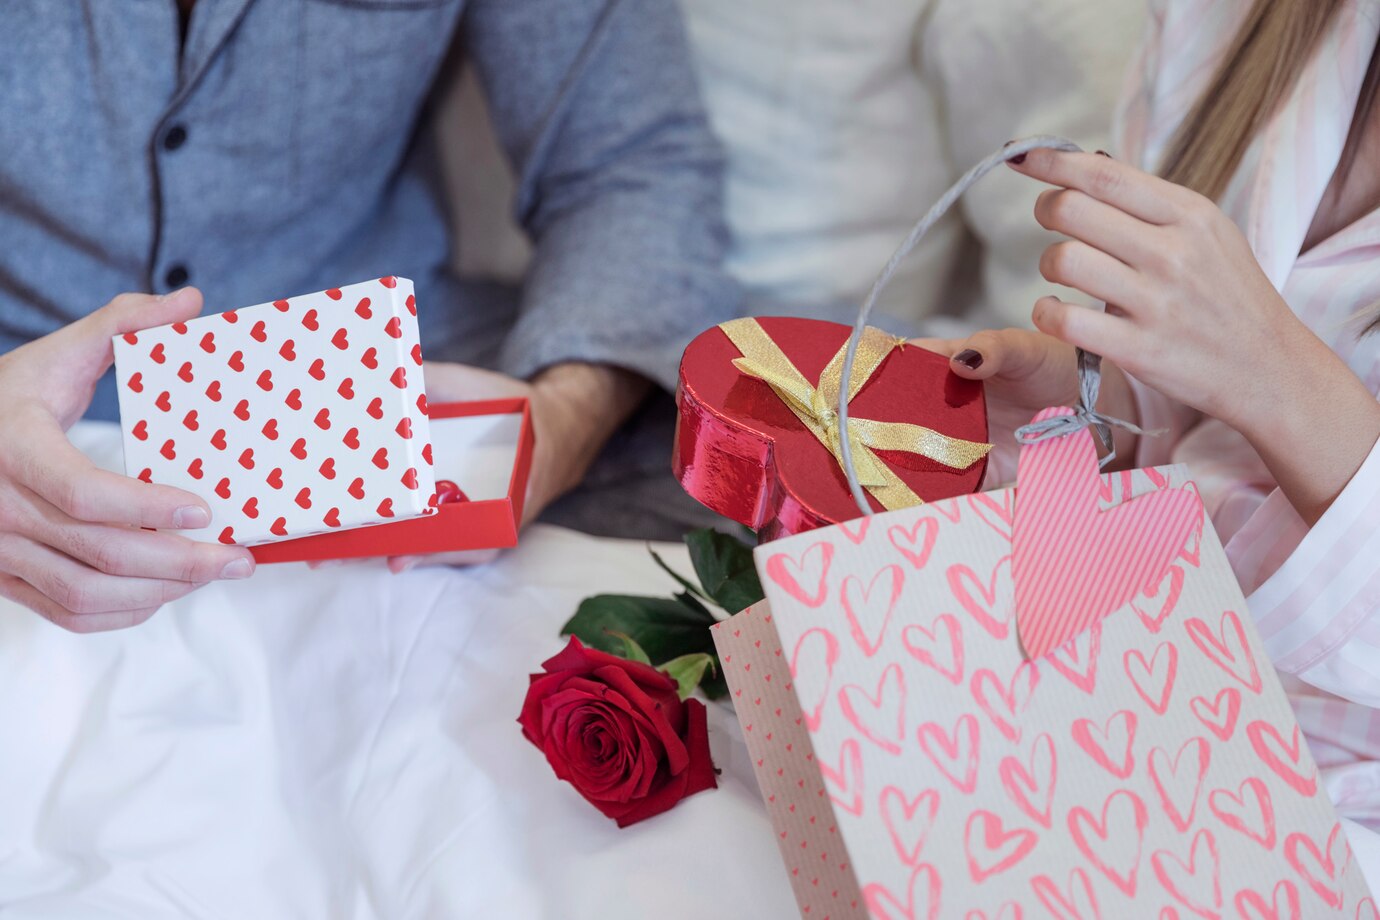 Romanticizing Your Valentine's Date With Sentimental Gifts